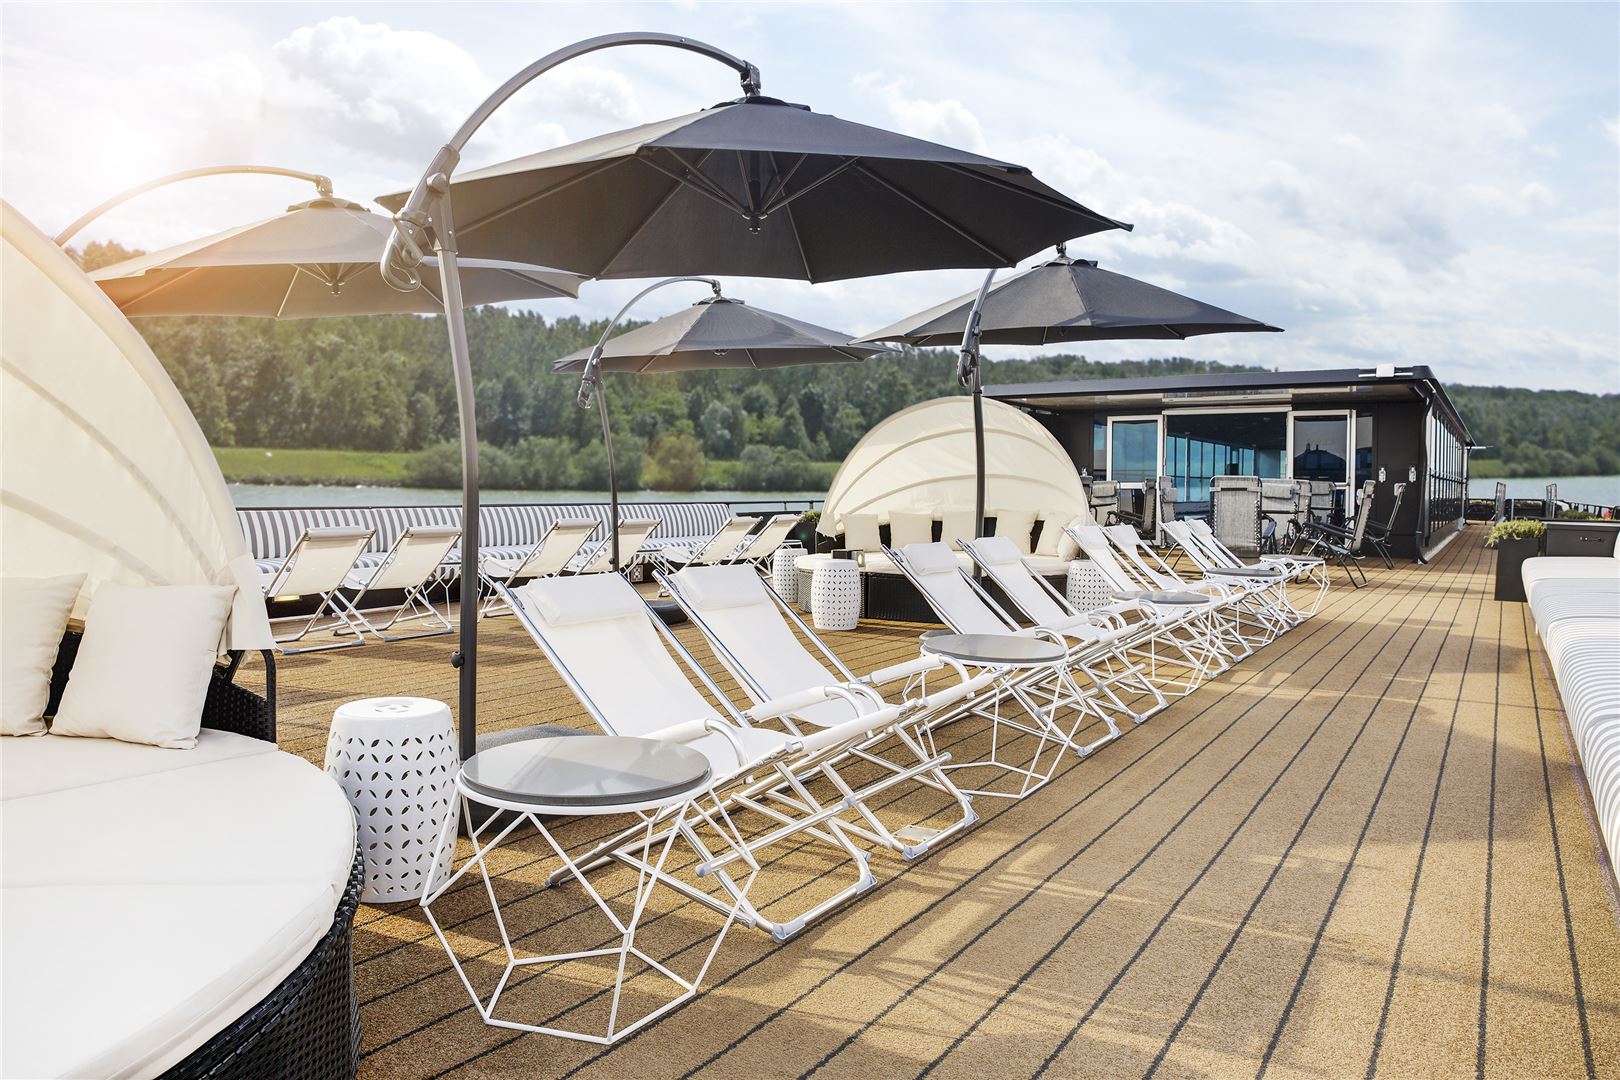 U by Uniworld's 'A' Takes Its Maiden Voyage on the Rhine